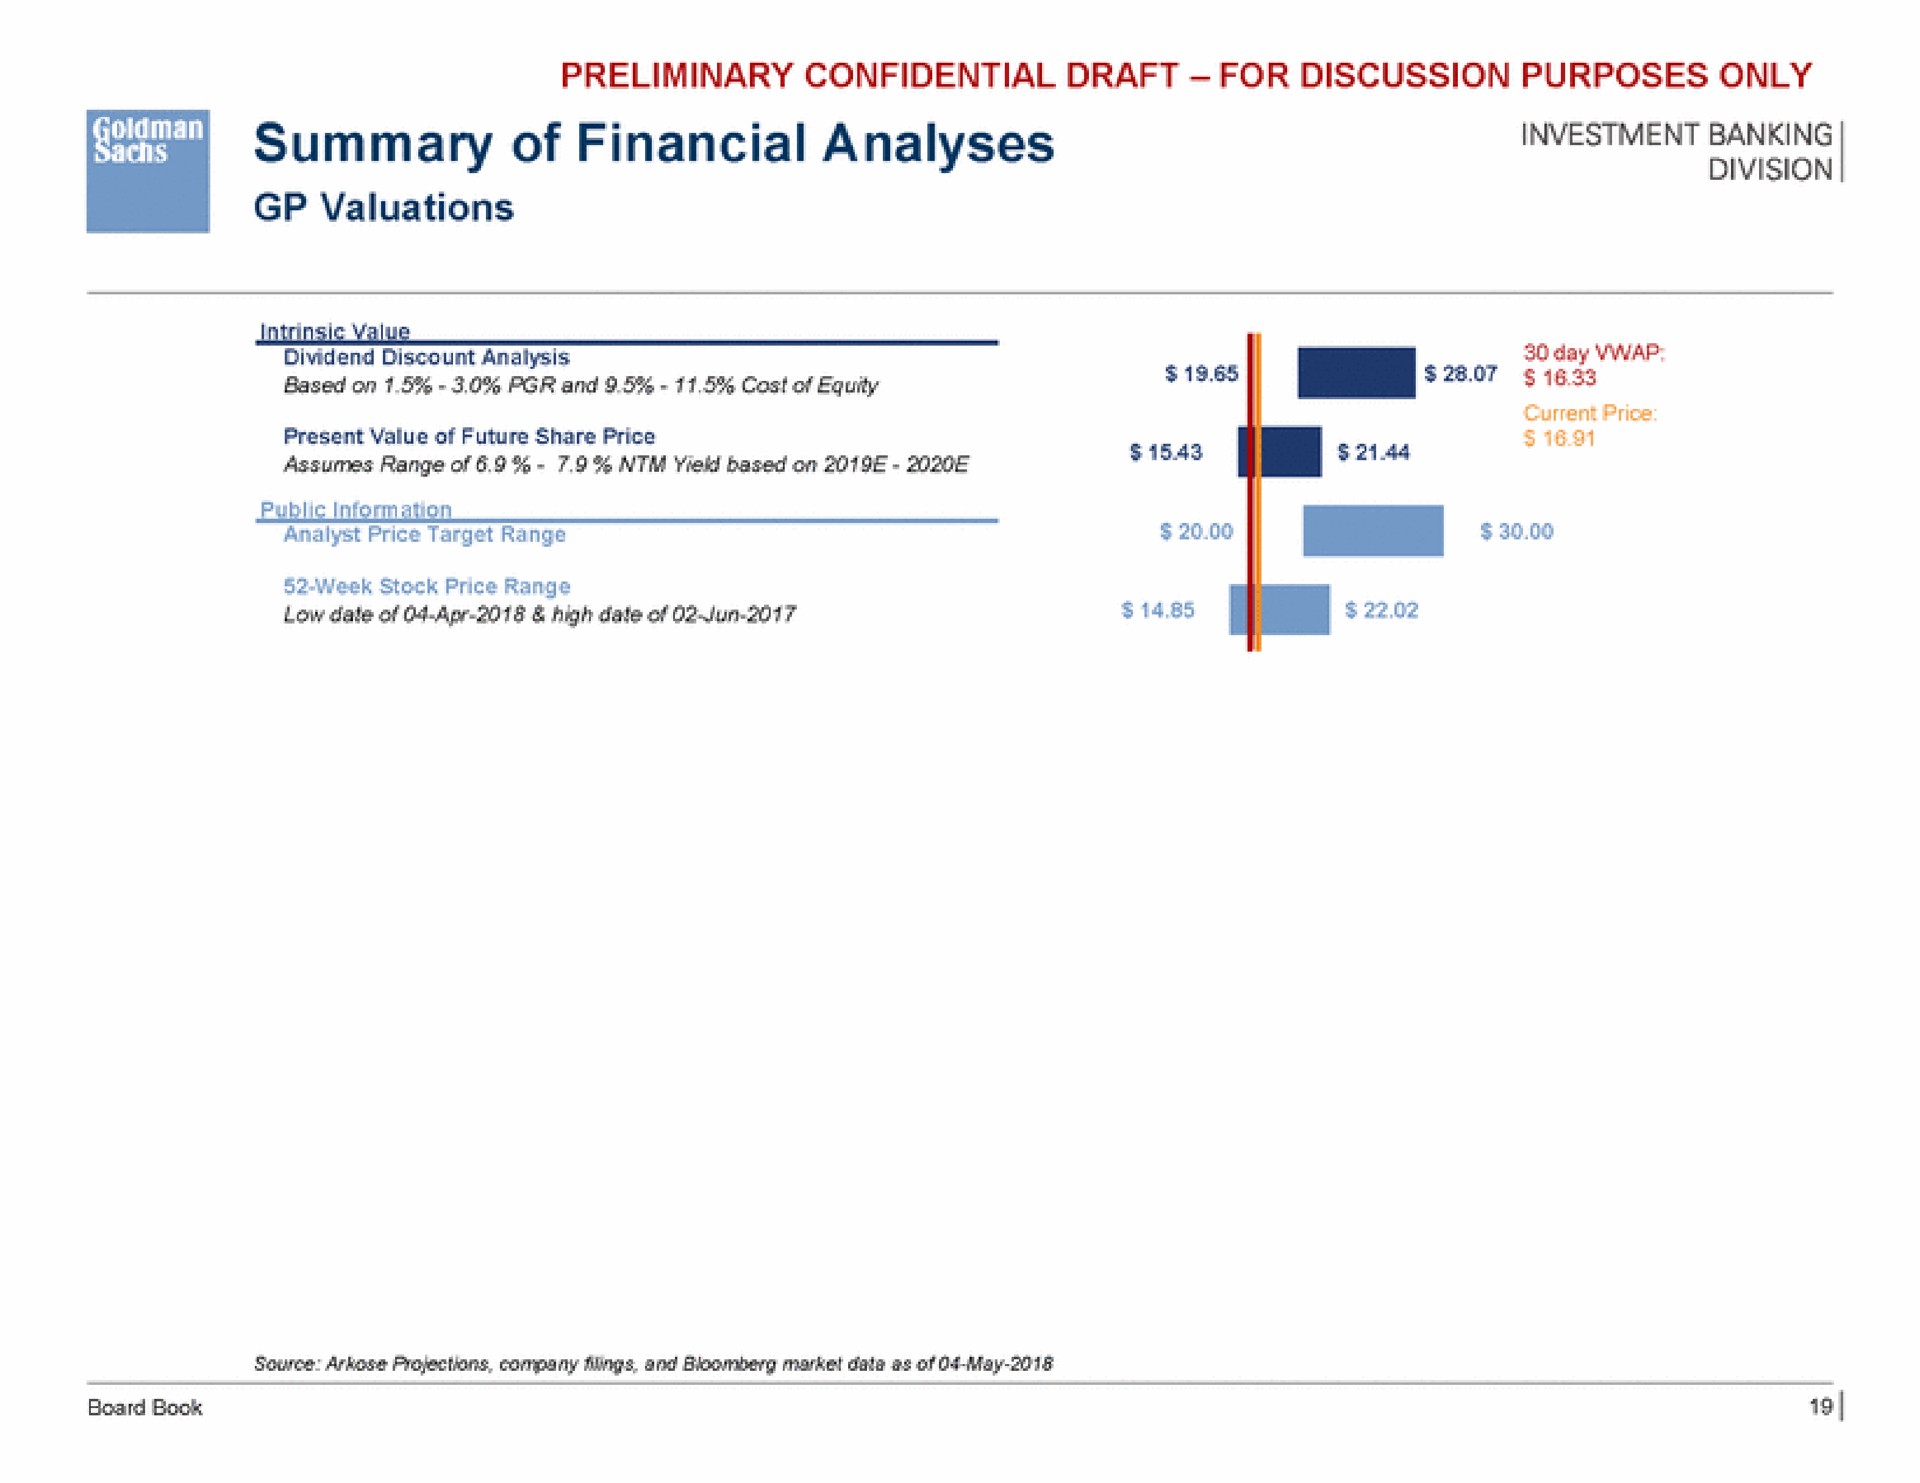 summary of financial analyses valuations | Goldman Sachs